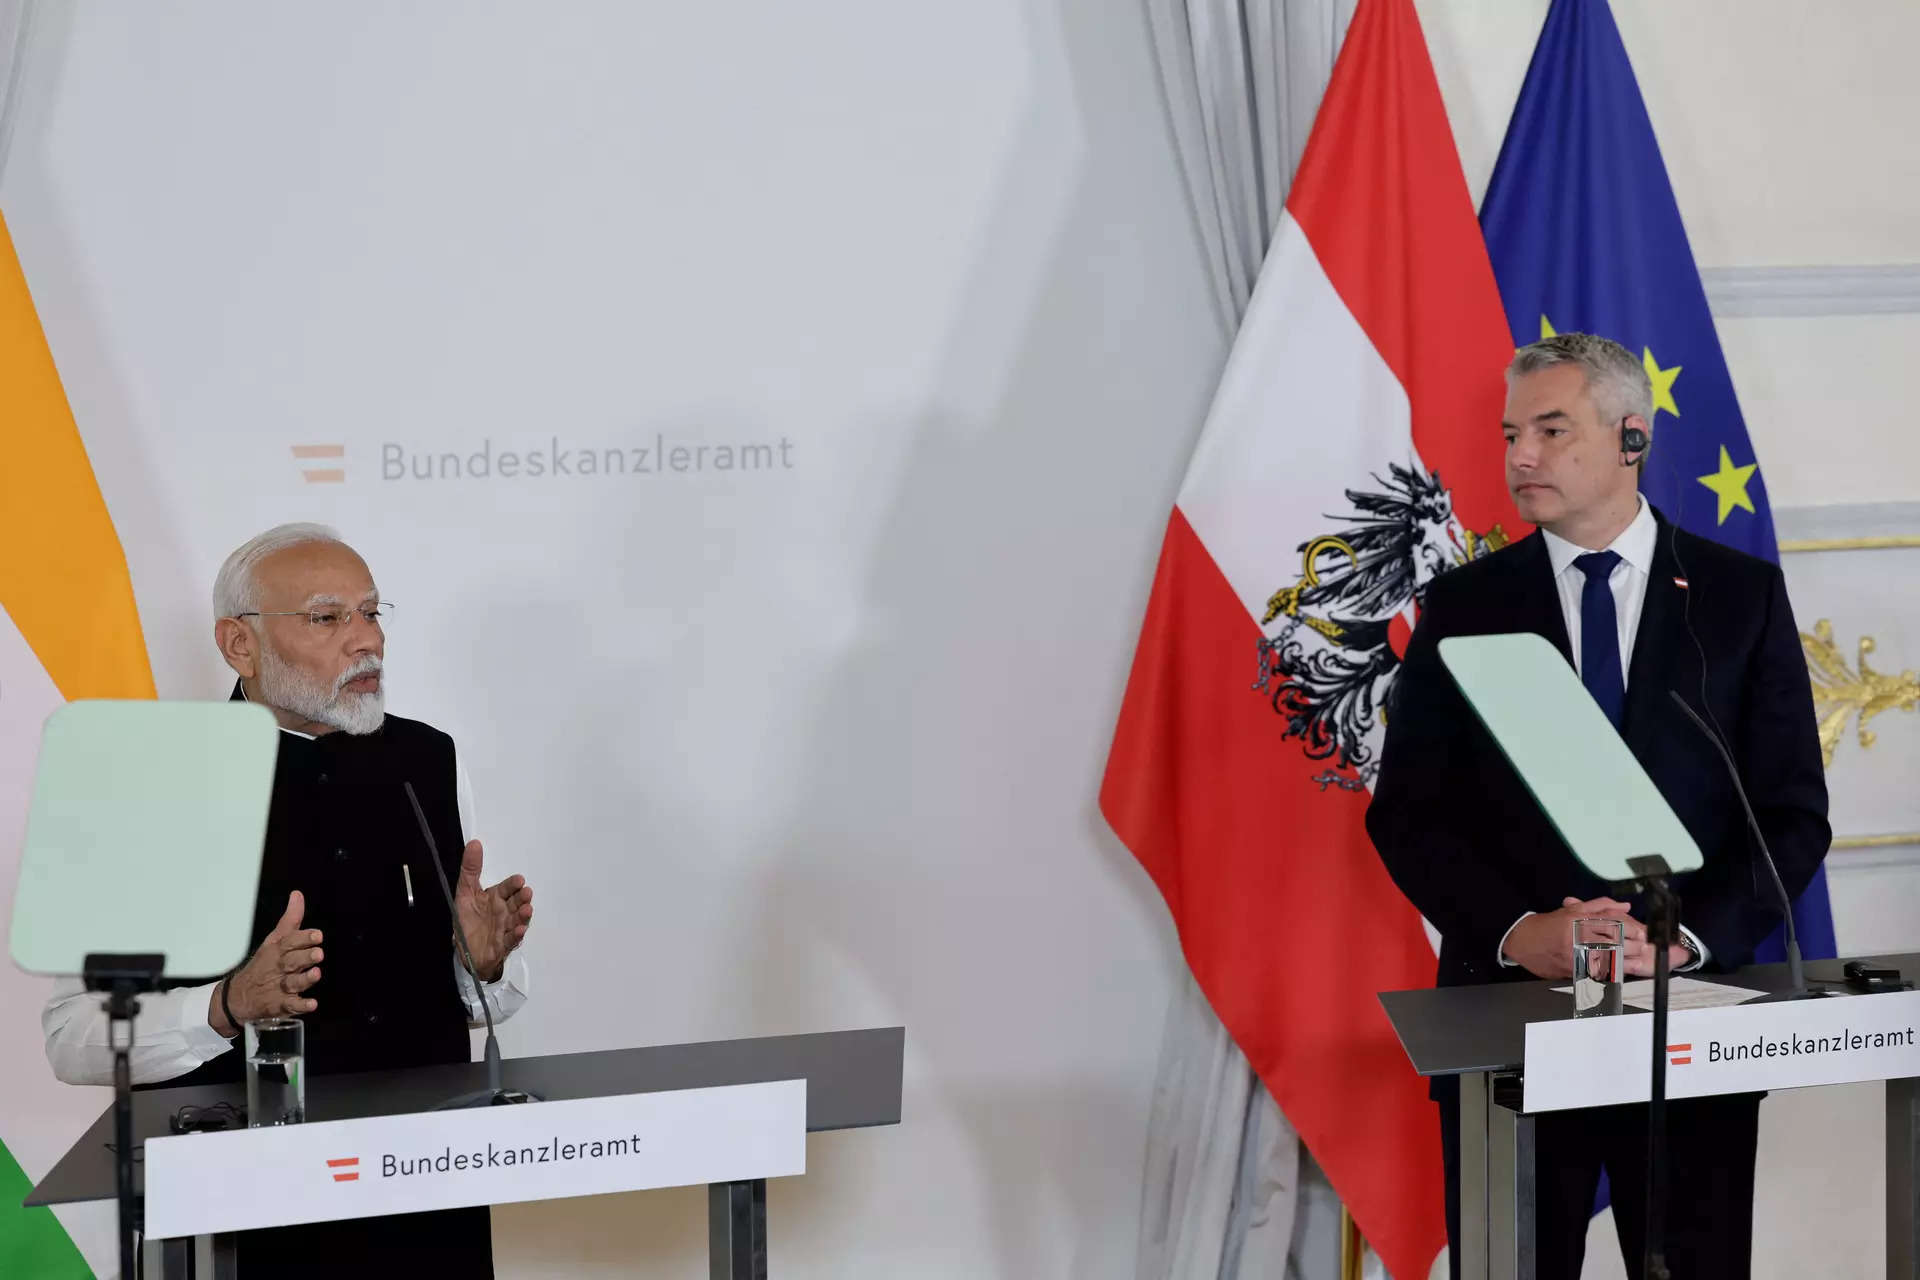 Killing of innocent people is unacceptable: PM Modi in joint statement with Austria Chancellor 